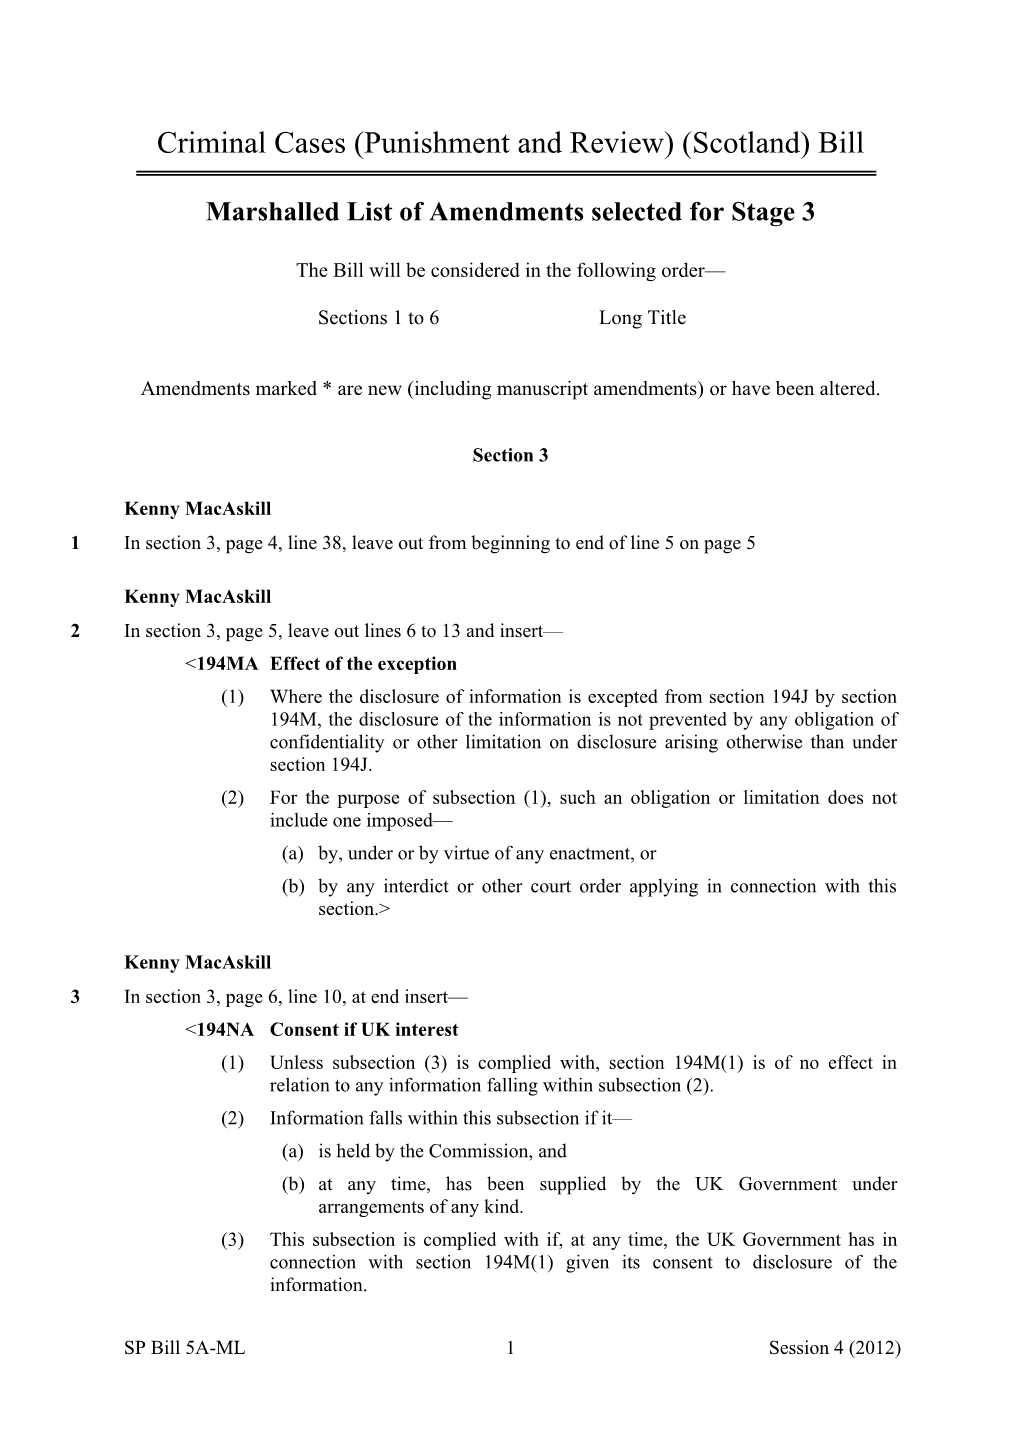 Marshalled List of Amendments Selected for Stage 3